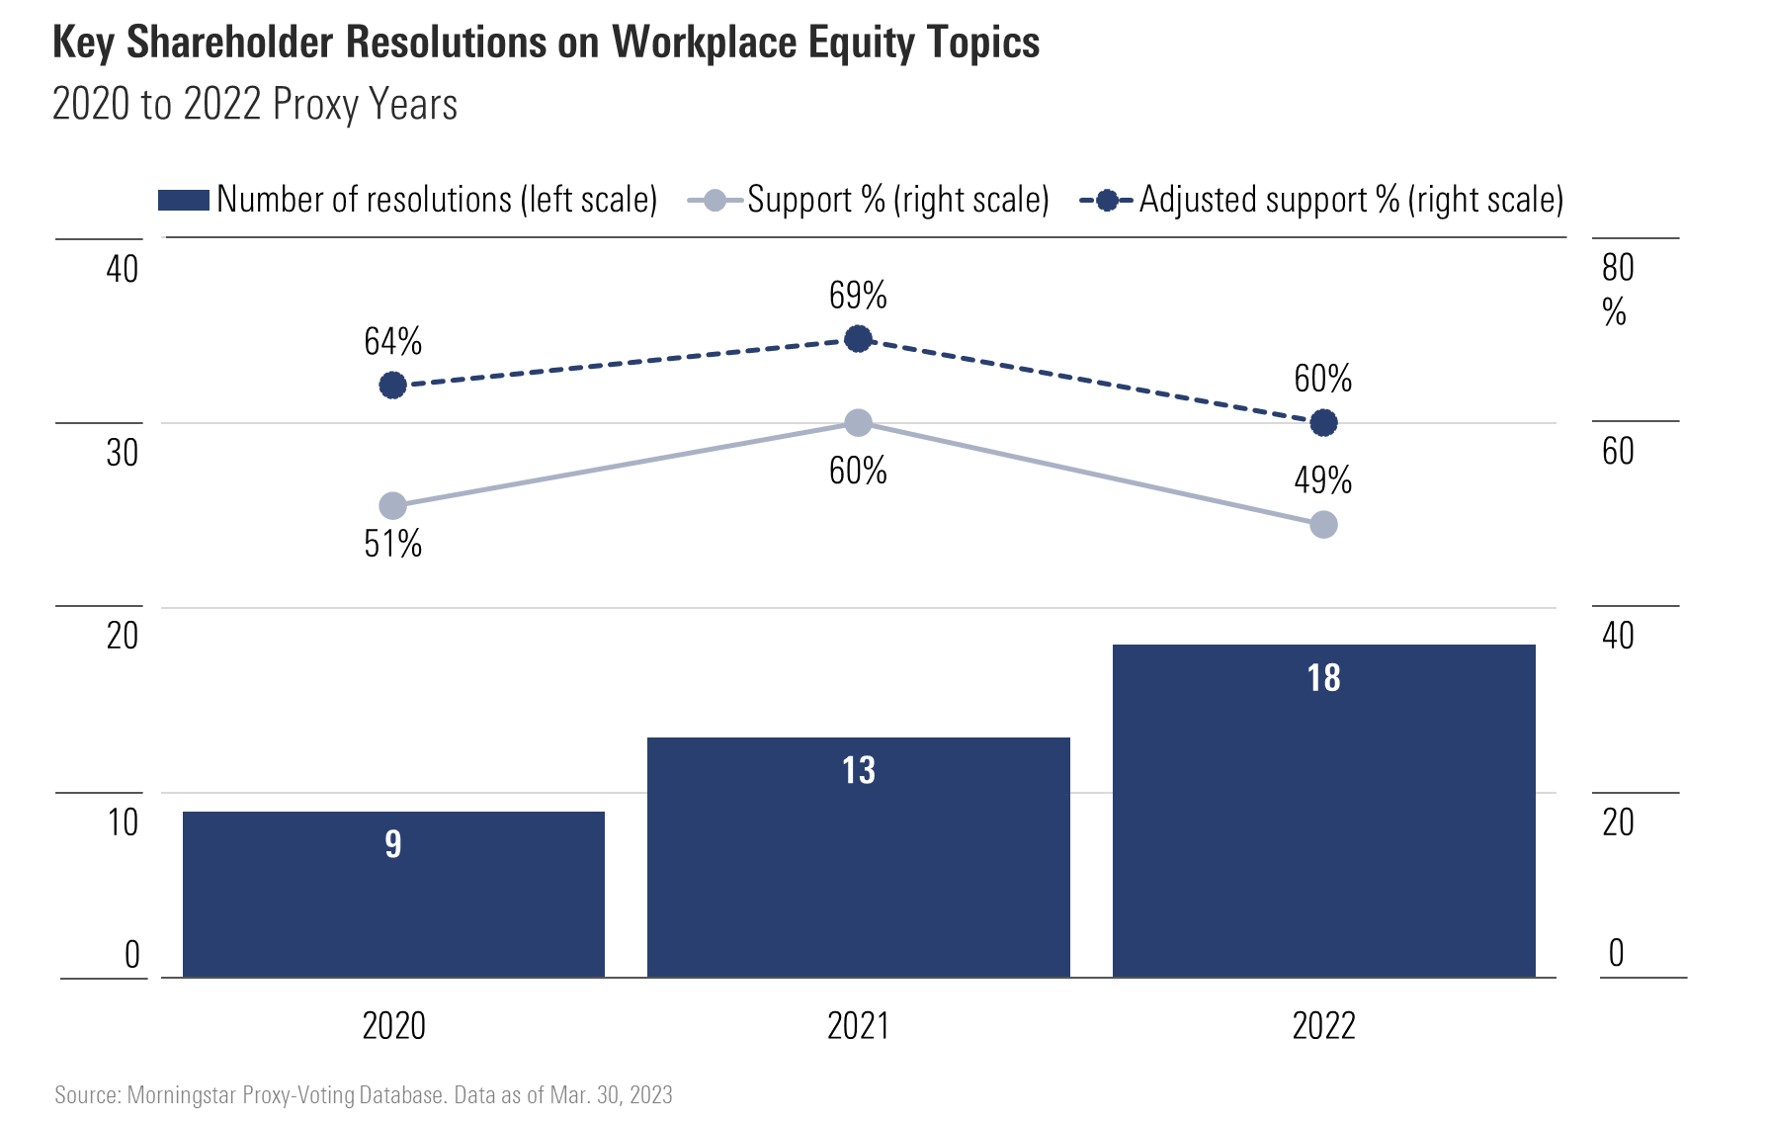 Chart showing that the number of shareholder resolutions on workplace equity themes at U.S. companies doubled over two years to 18 in the 2022 proxy year.